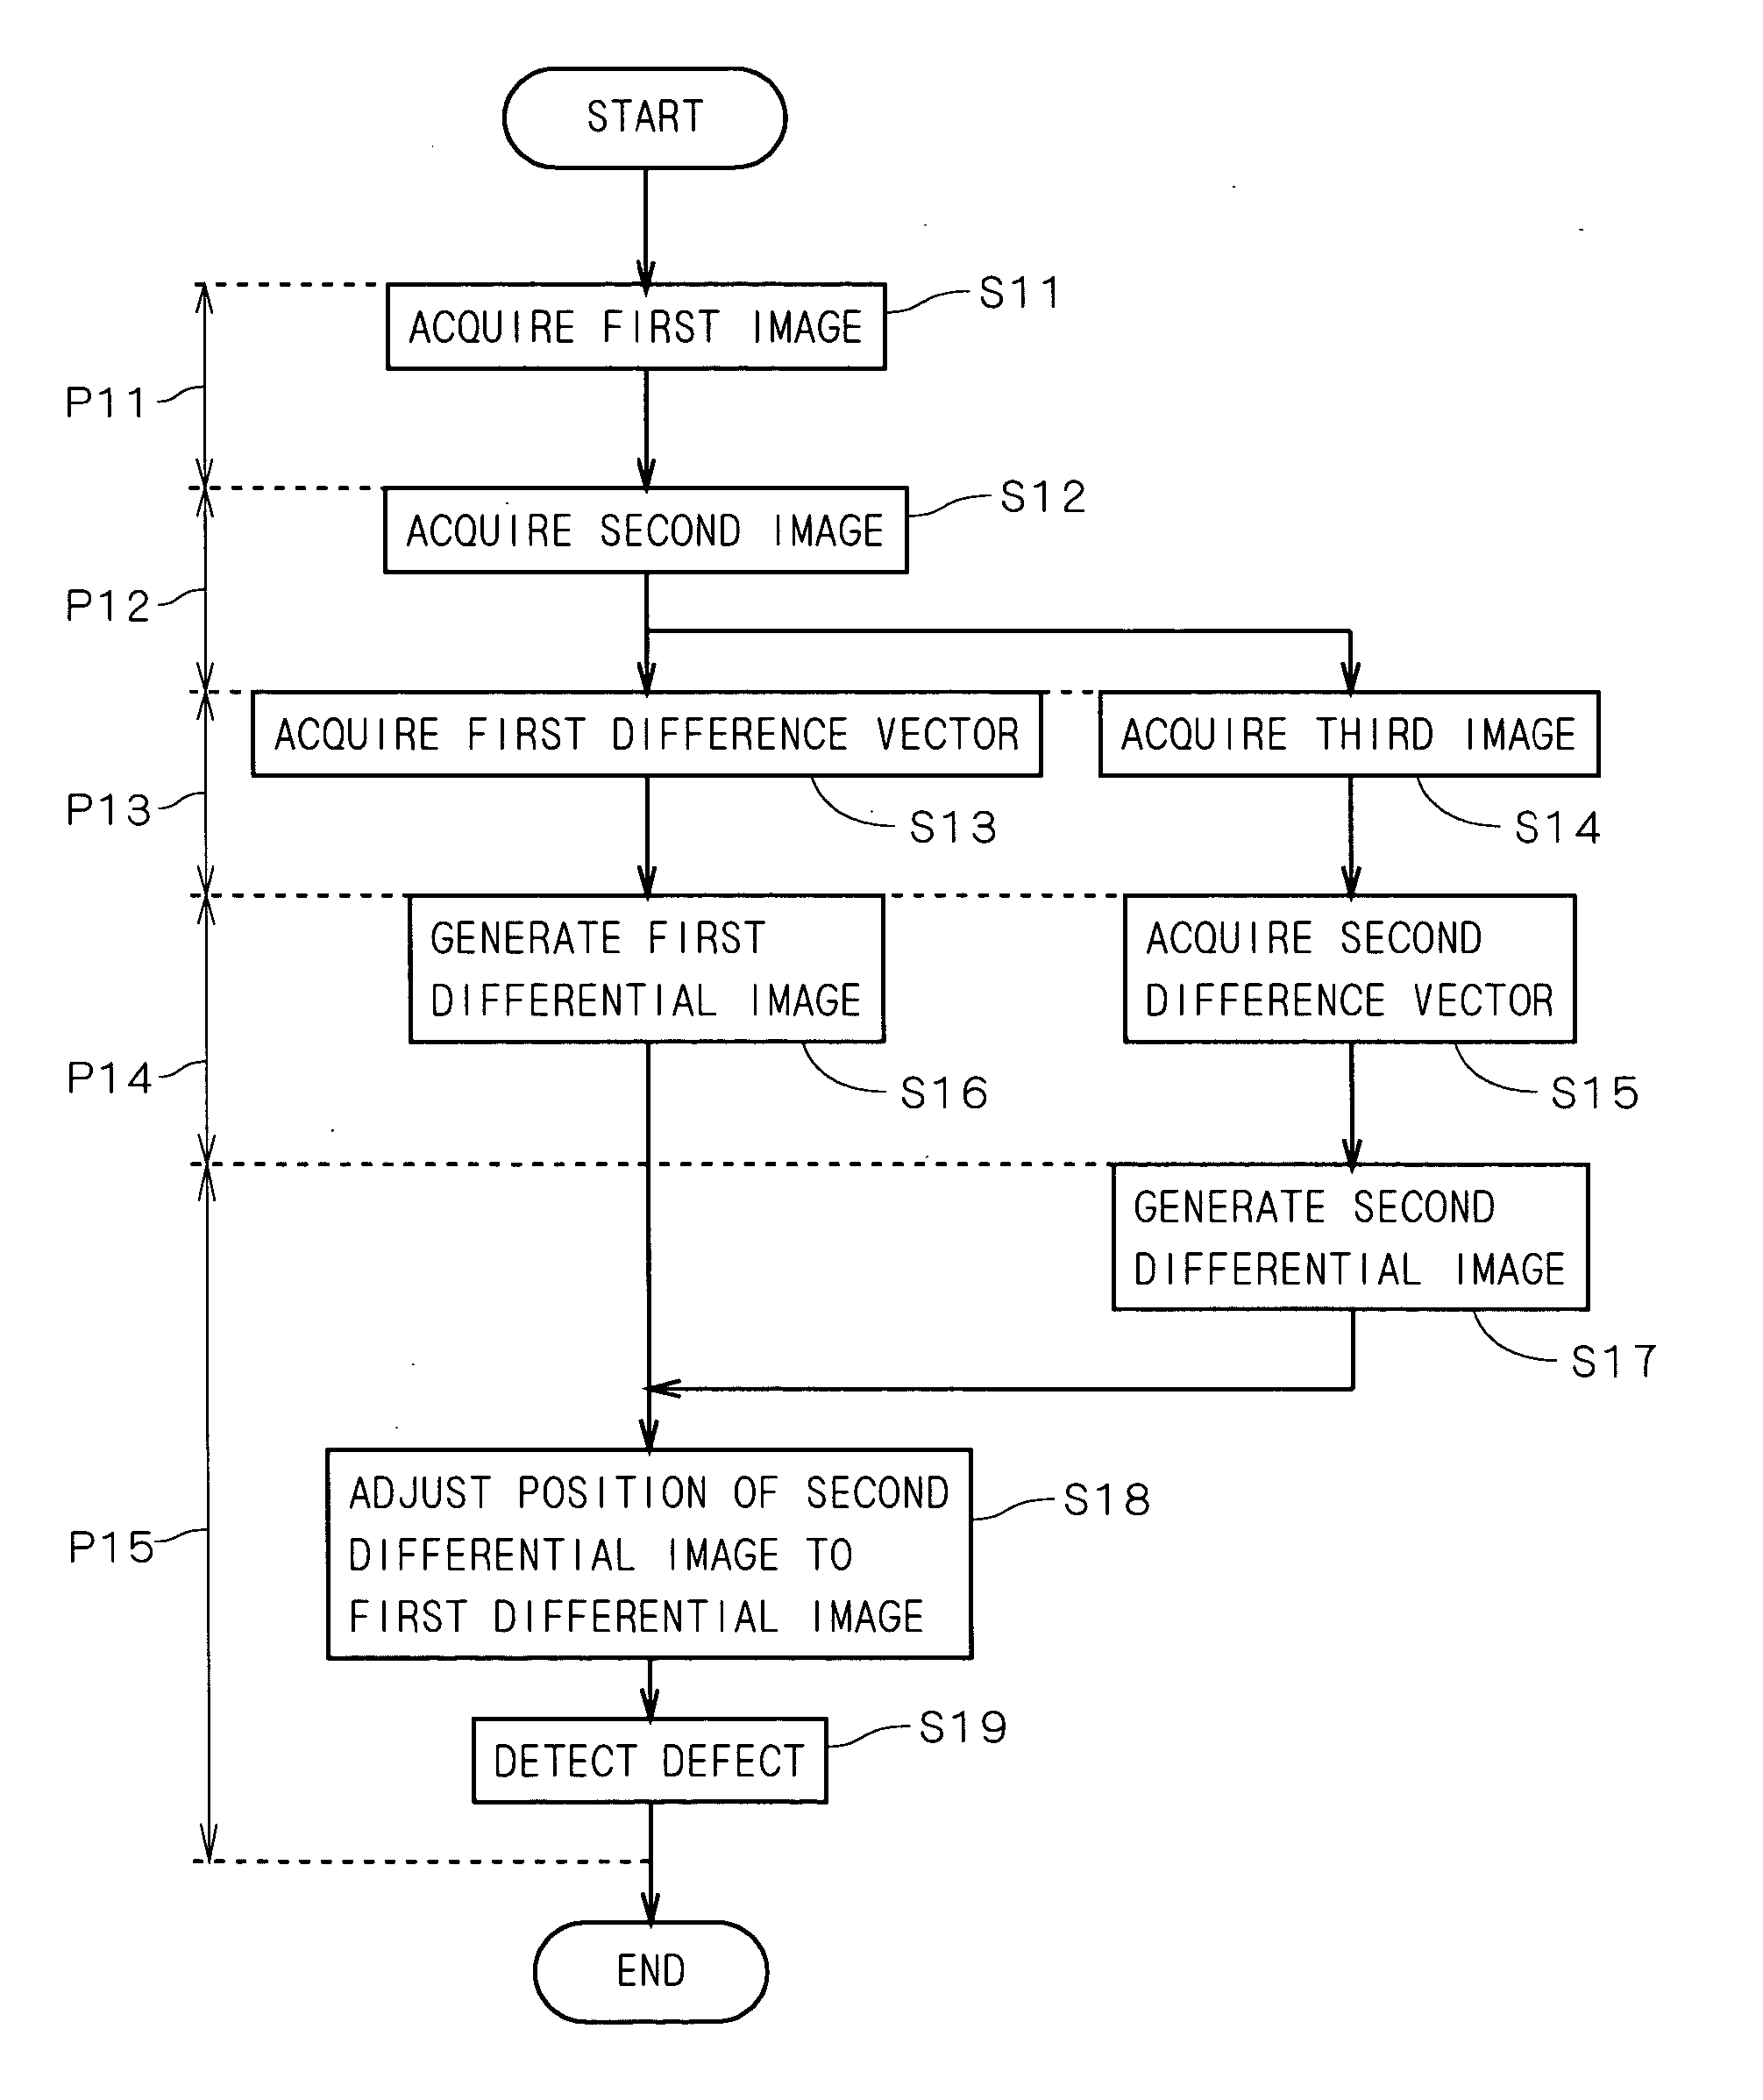 Apparatus and method for detecting defects in periodic pattern on object